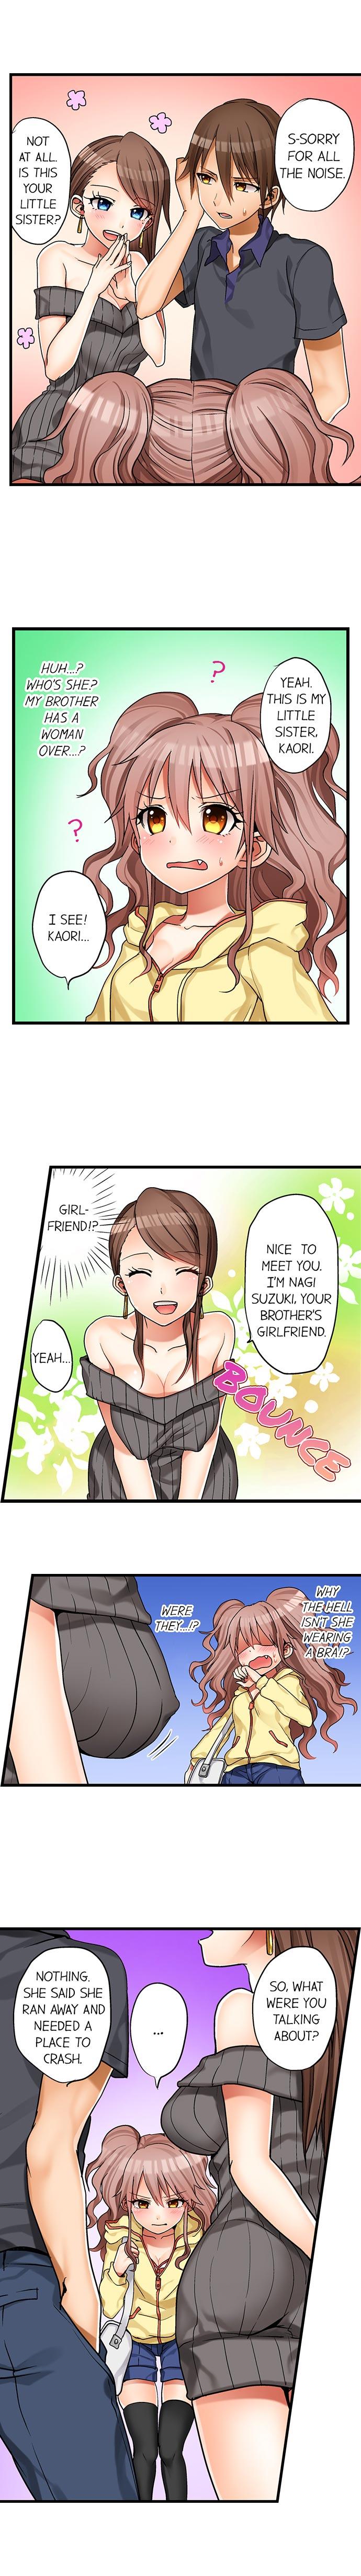 Groupsex My First Time is with.... My Little Sister?! Ch.1 - Original Gang - Page 8